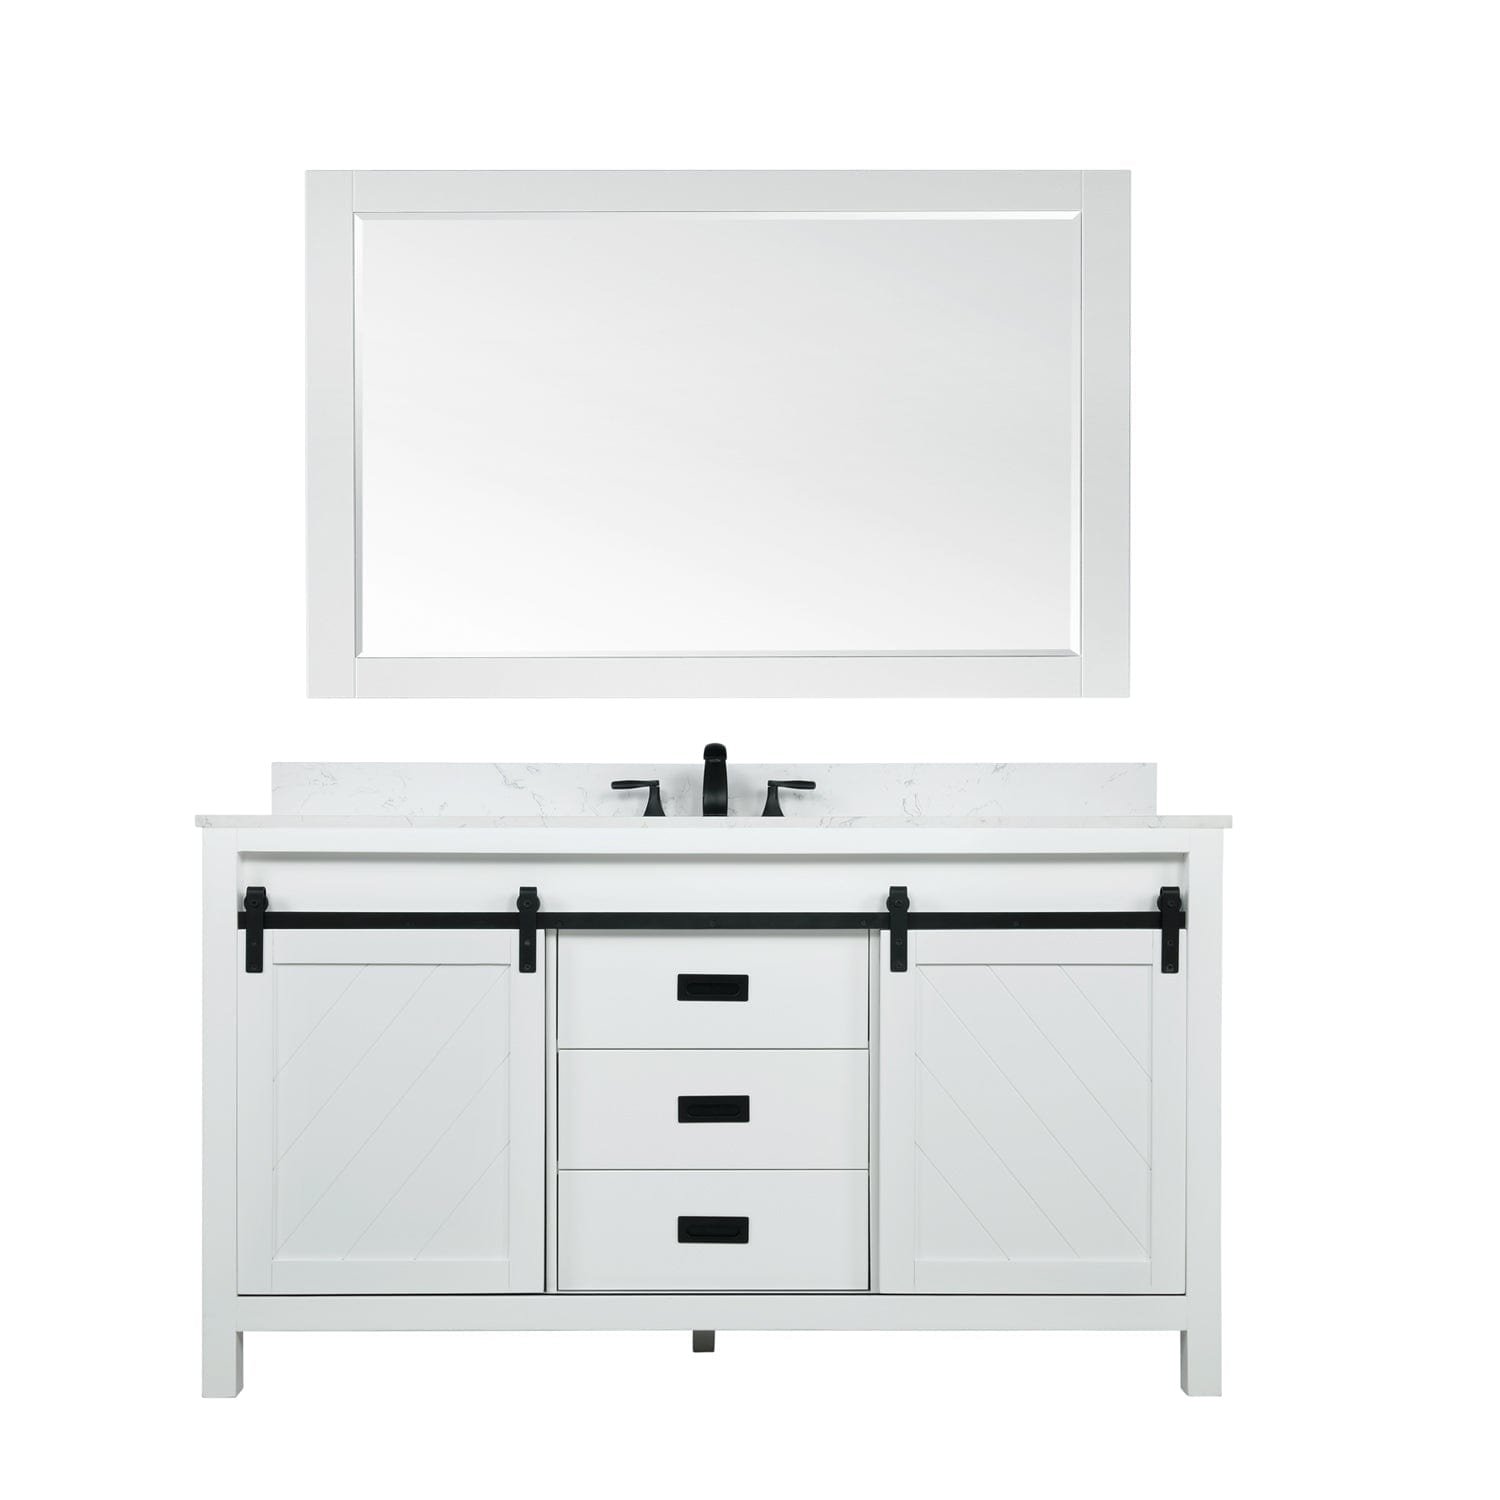 Altair Kinsley 60" Single Bathroom Vanity Set in White and Carrara White Marble Countertop with Mirror 536060S-WH-AW - Molaix696952511277Vanity536060S-WH-AW